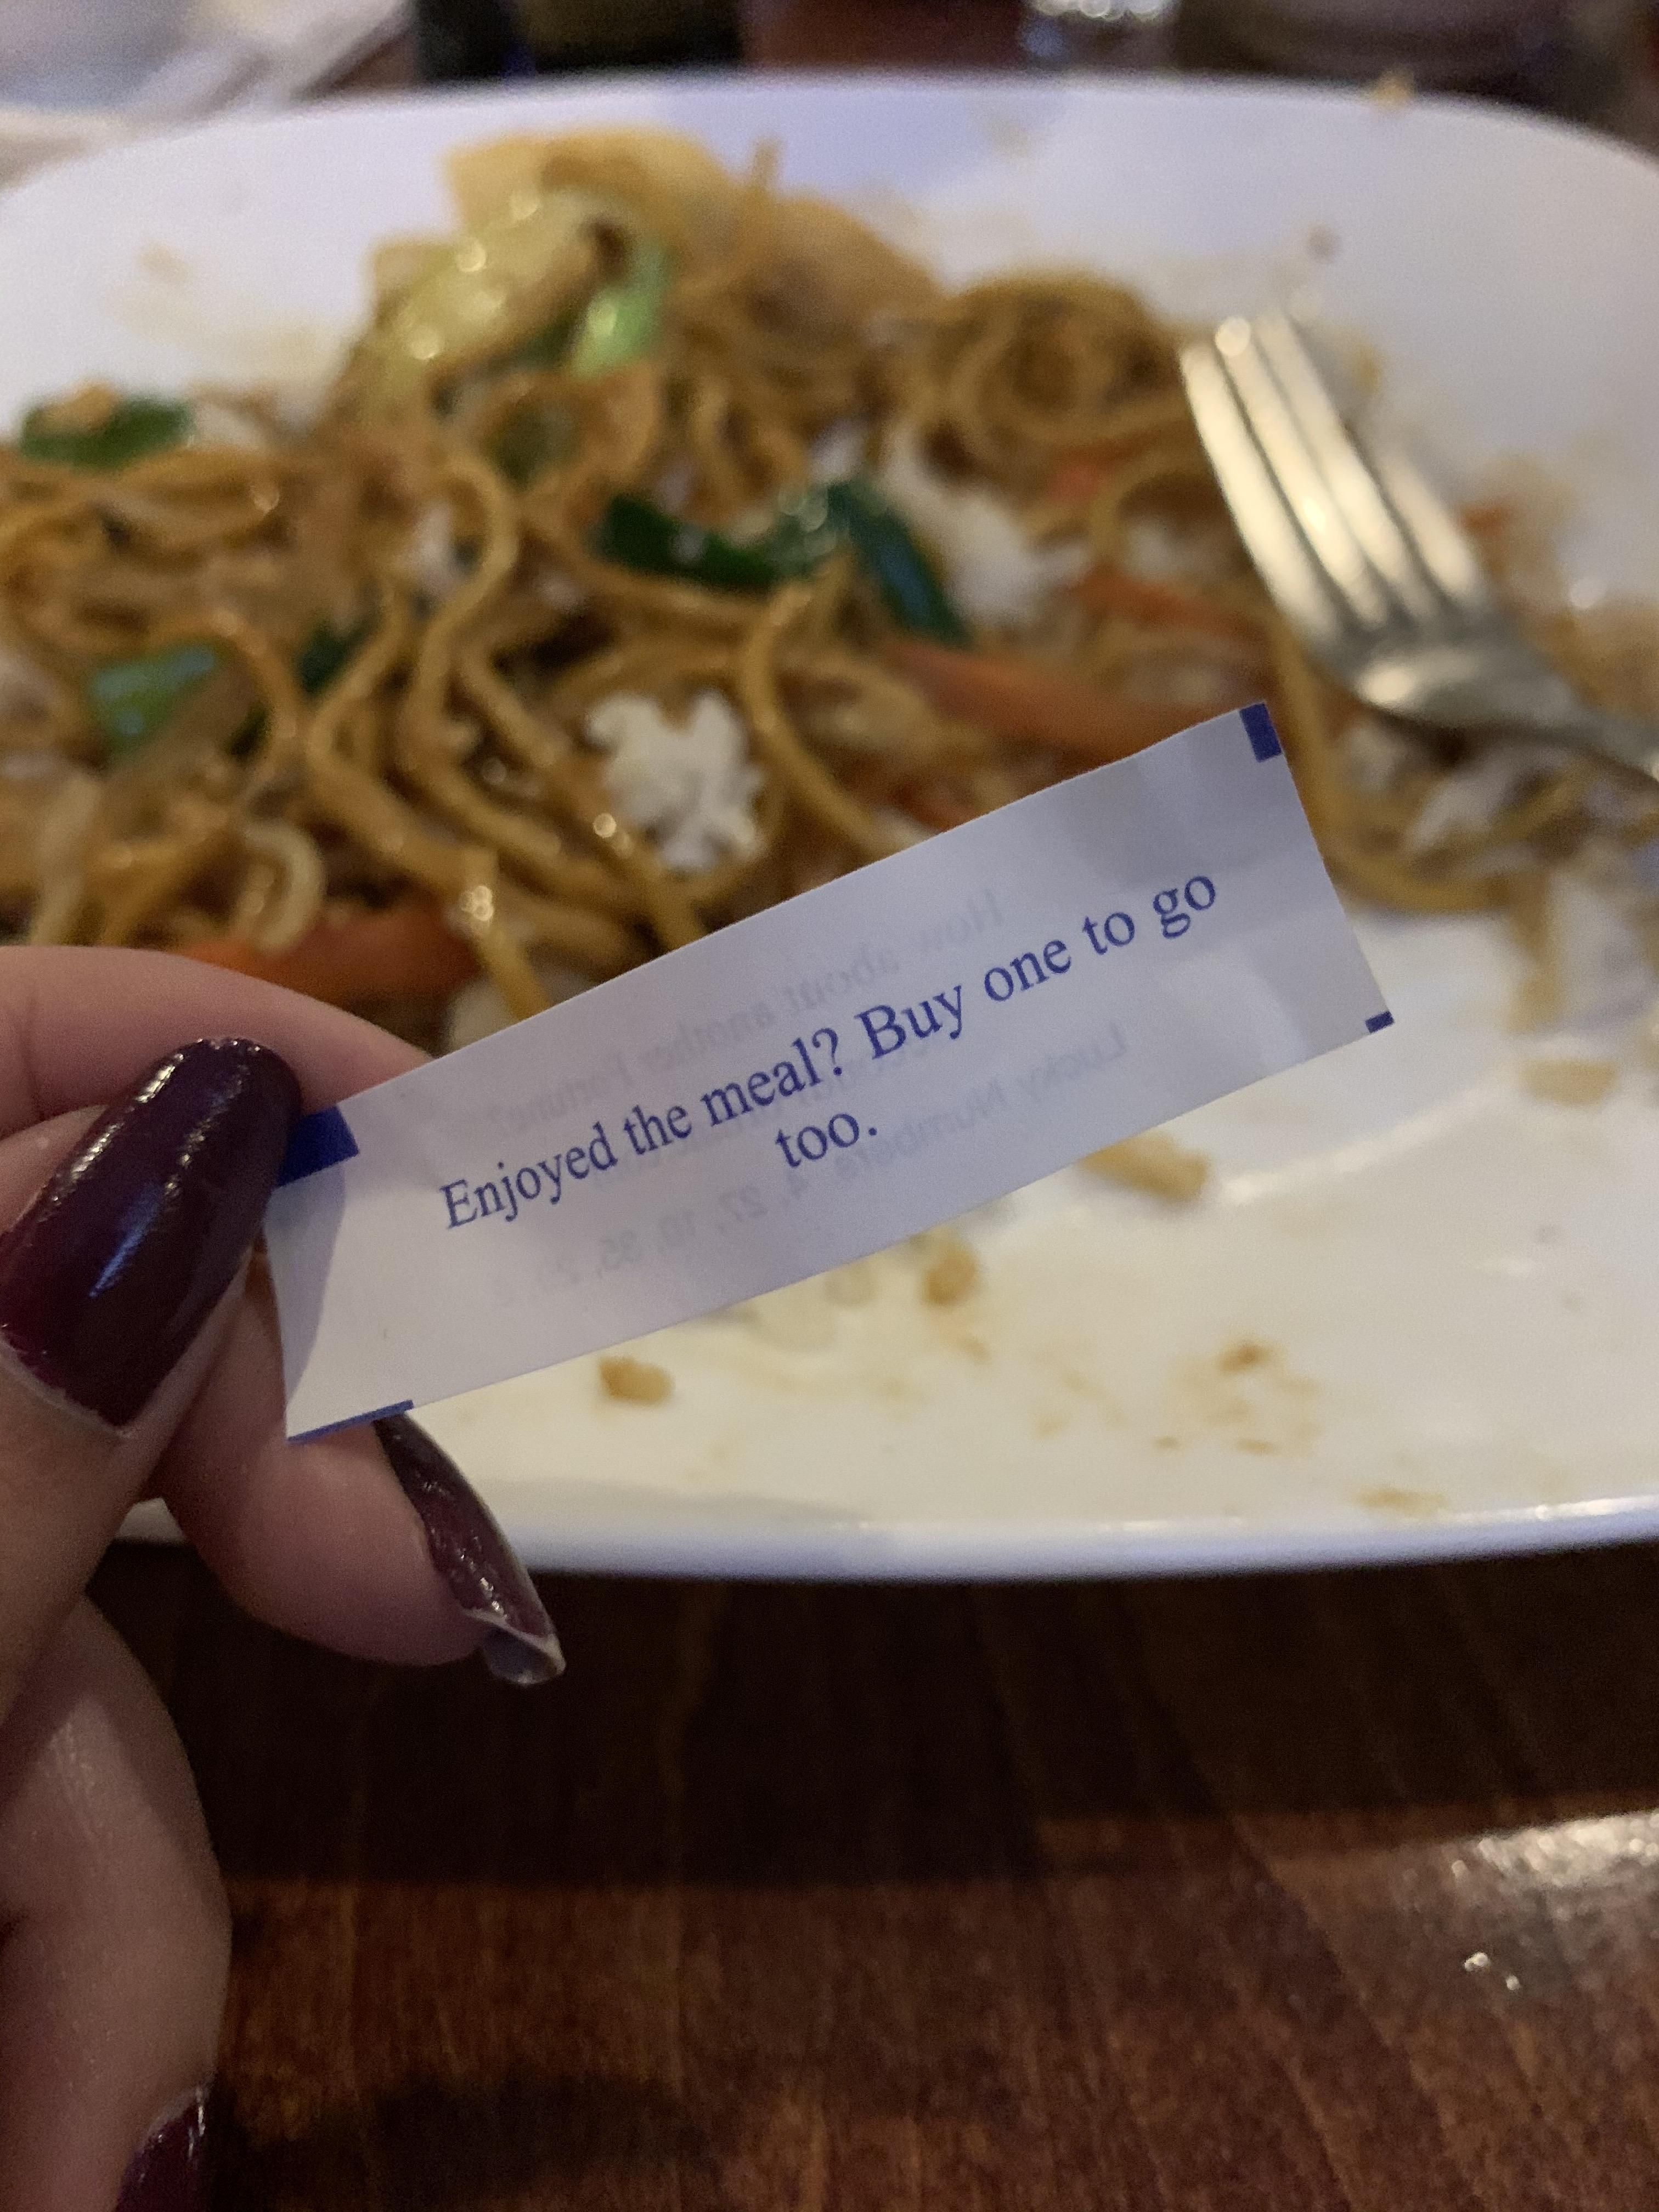 I got an ad instead of a fortune